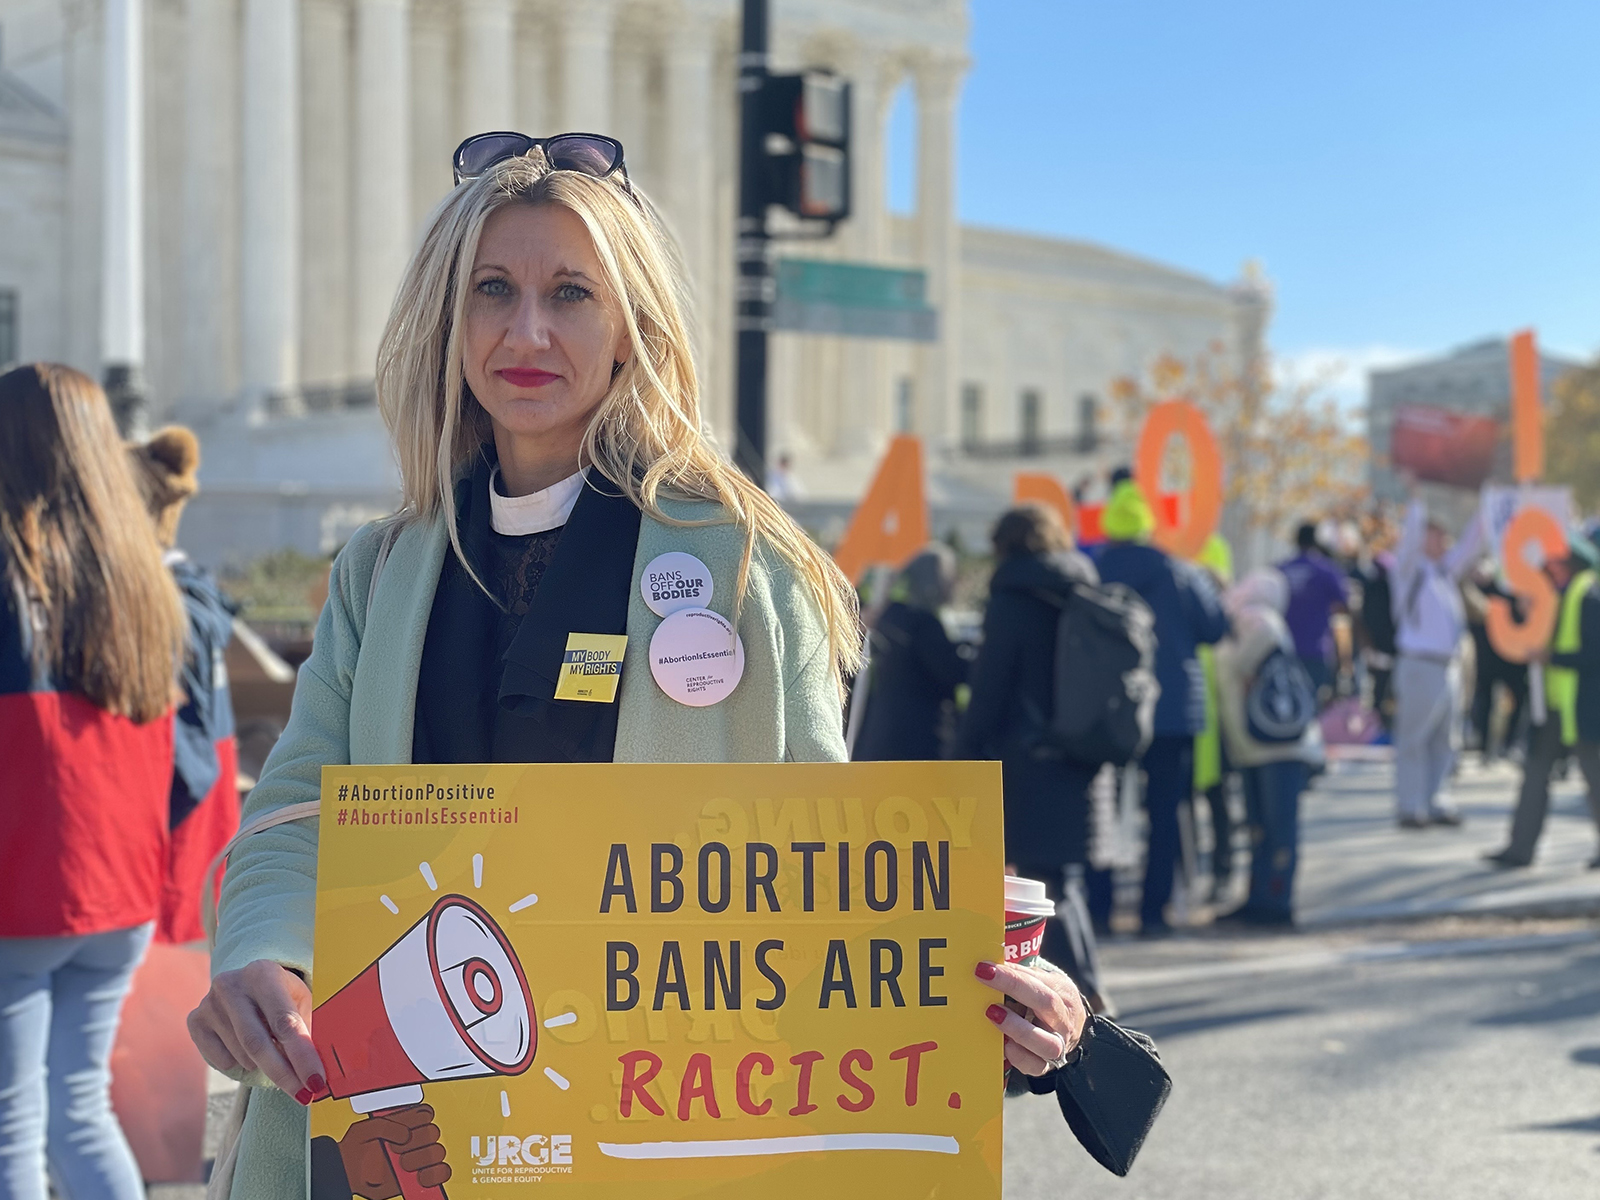 Reverend Amanda Hambrick in front of the United States Supreme Court, Wednesday, December 1, 2021, in Washington, DC RNS photo by Jack Jenkins